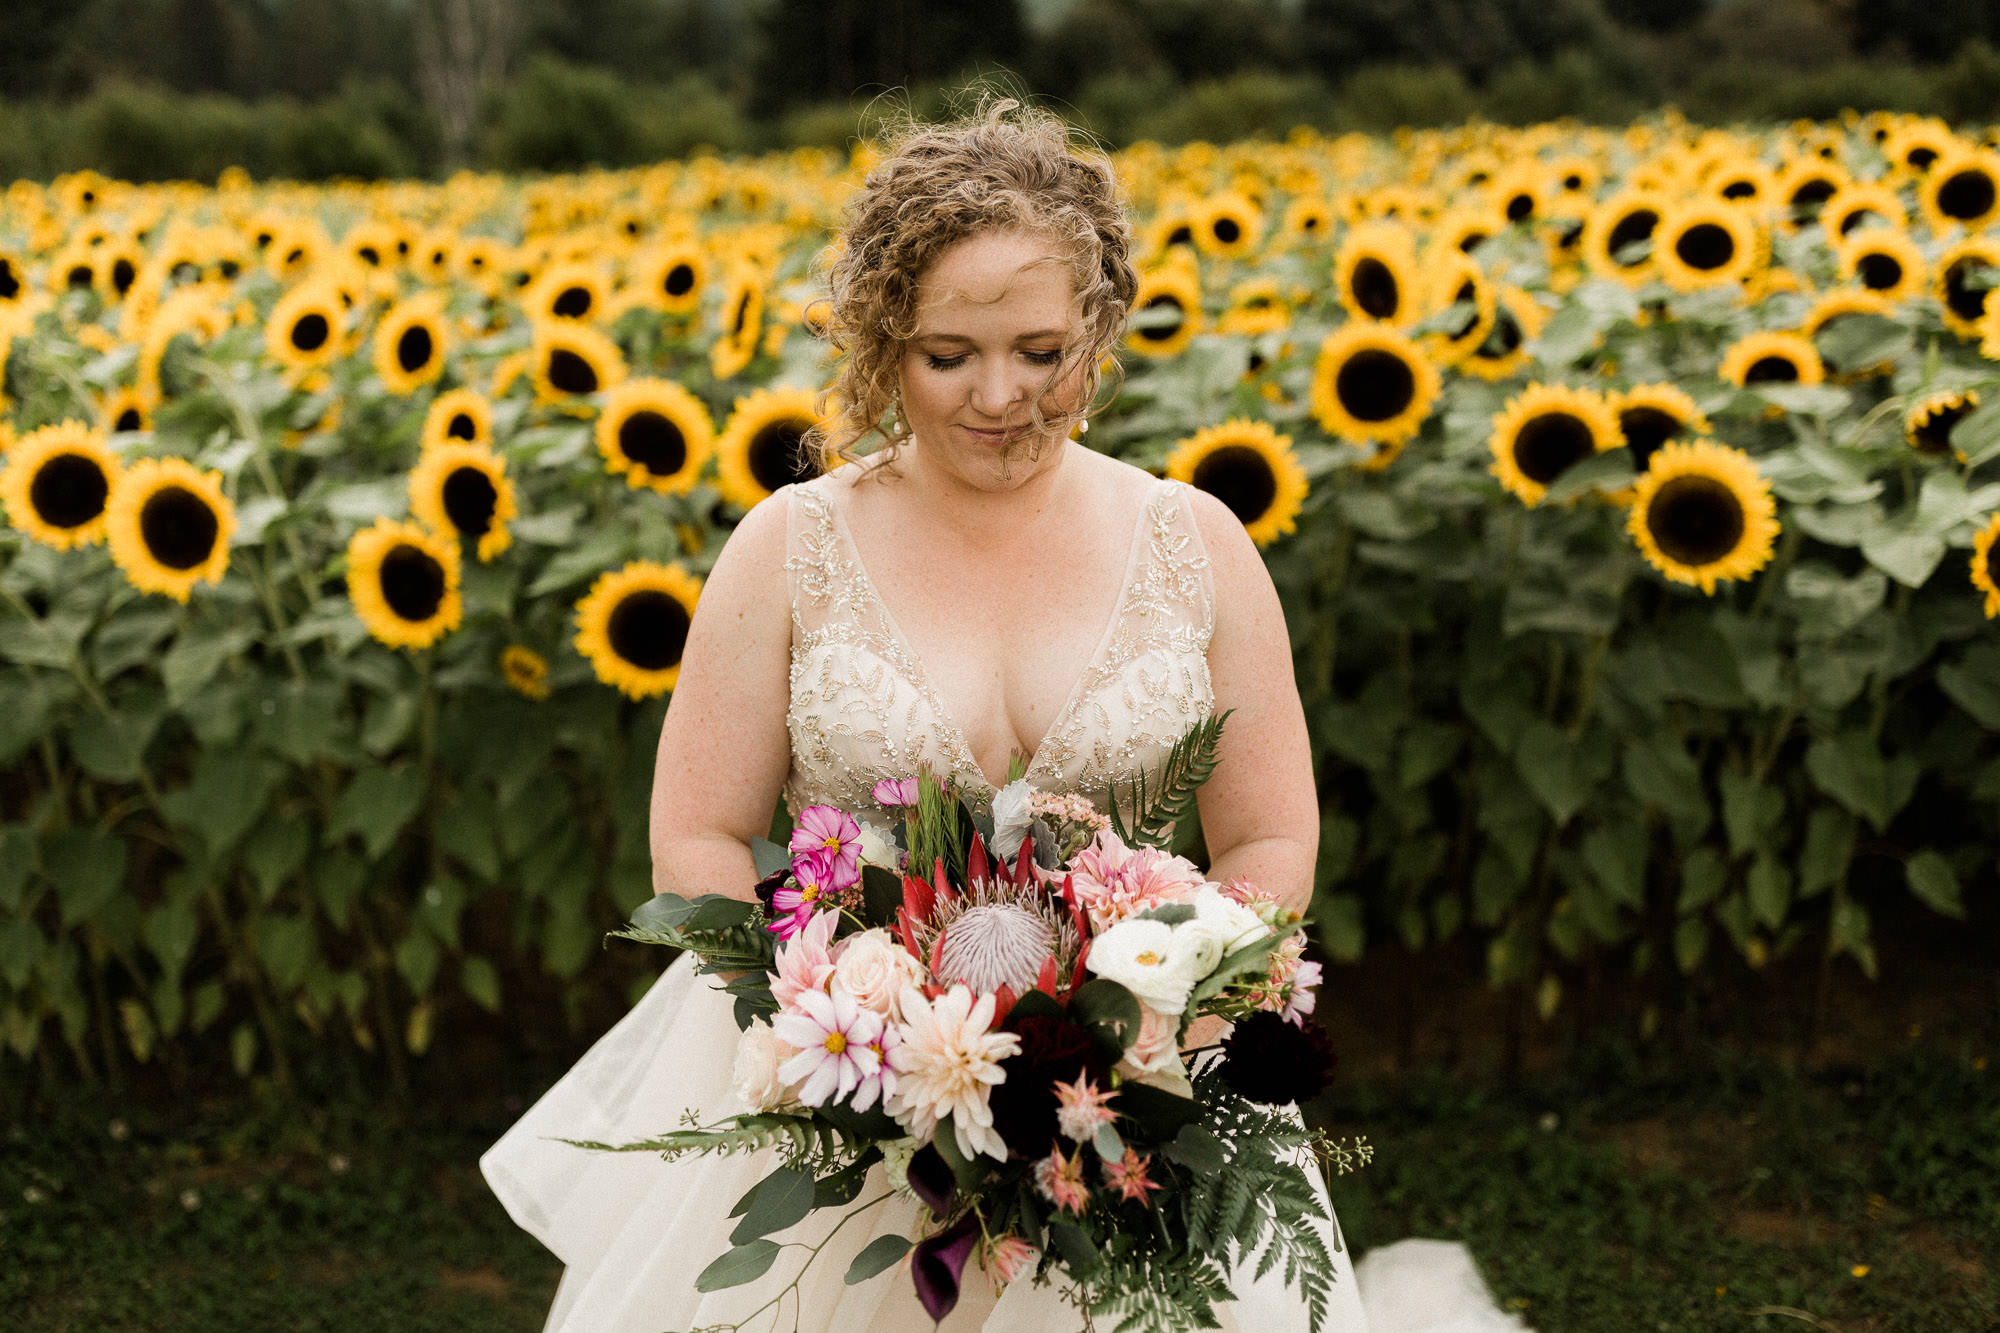 Bride gazes at bouquet in front of sunflower field at Mt View Orchards in Oreogn